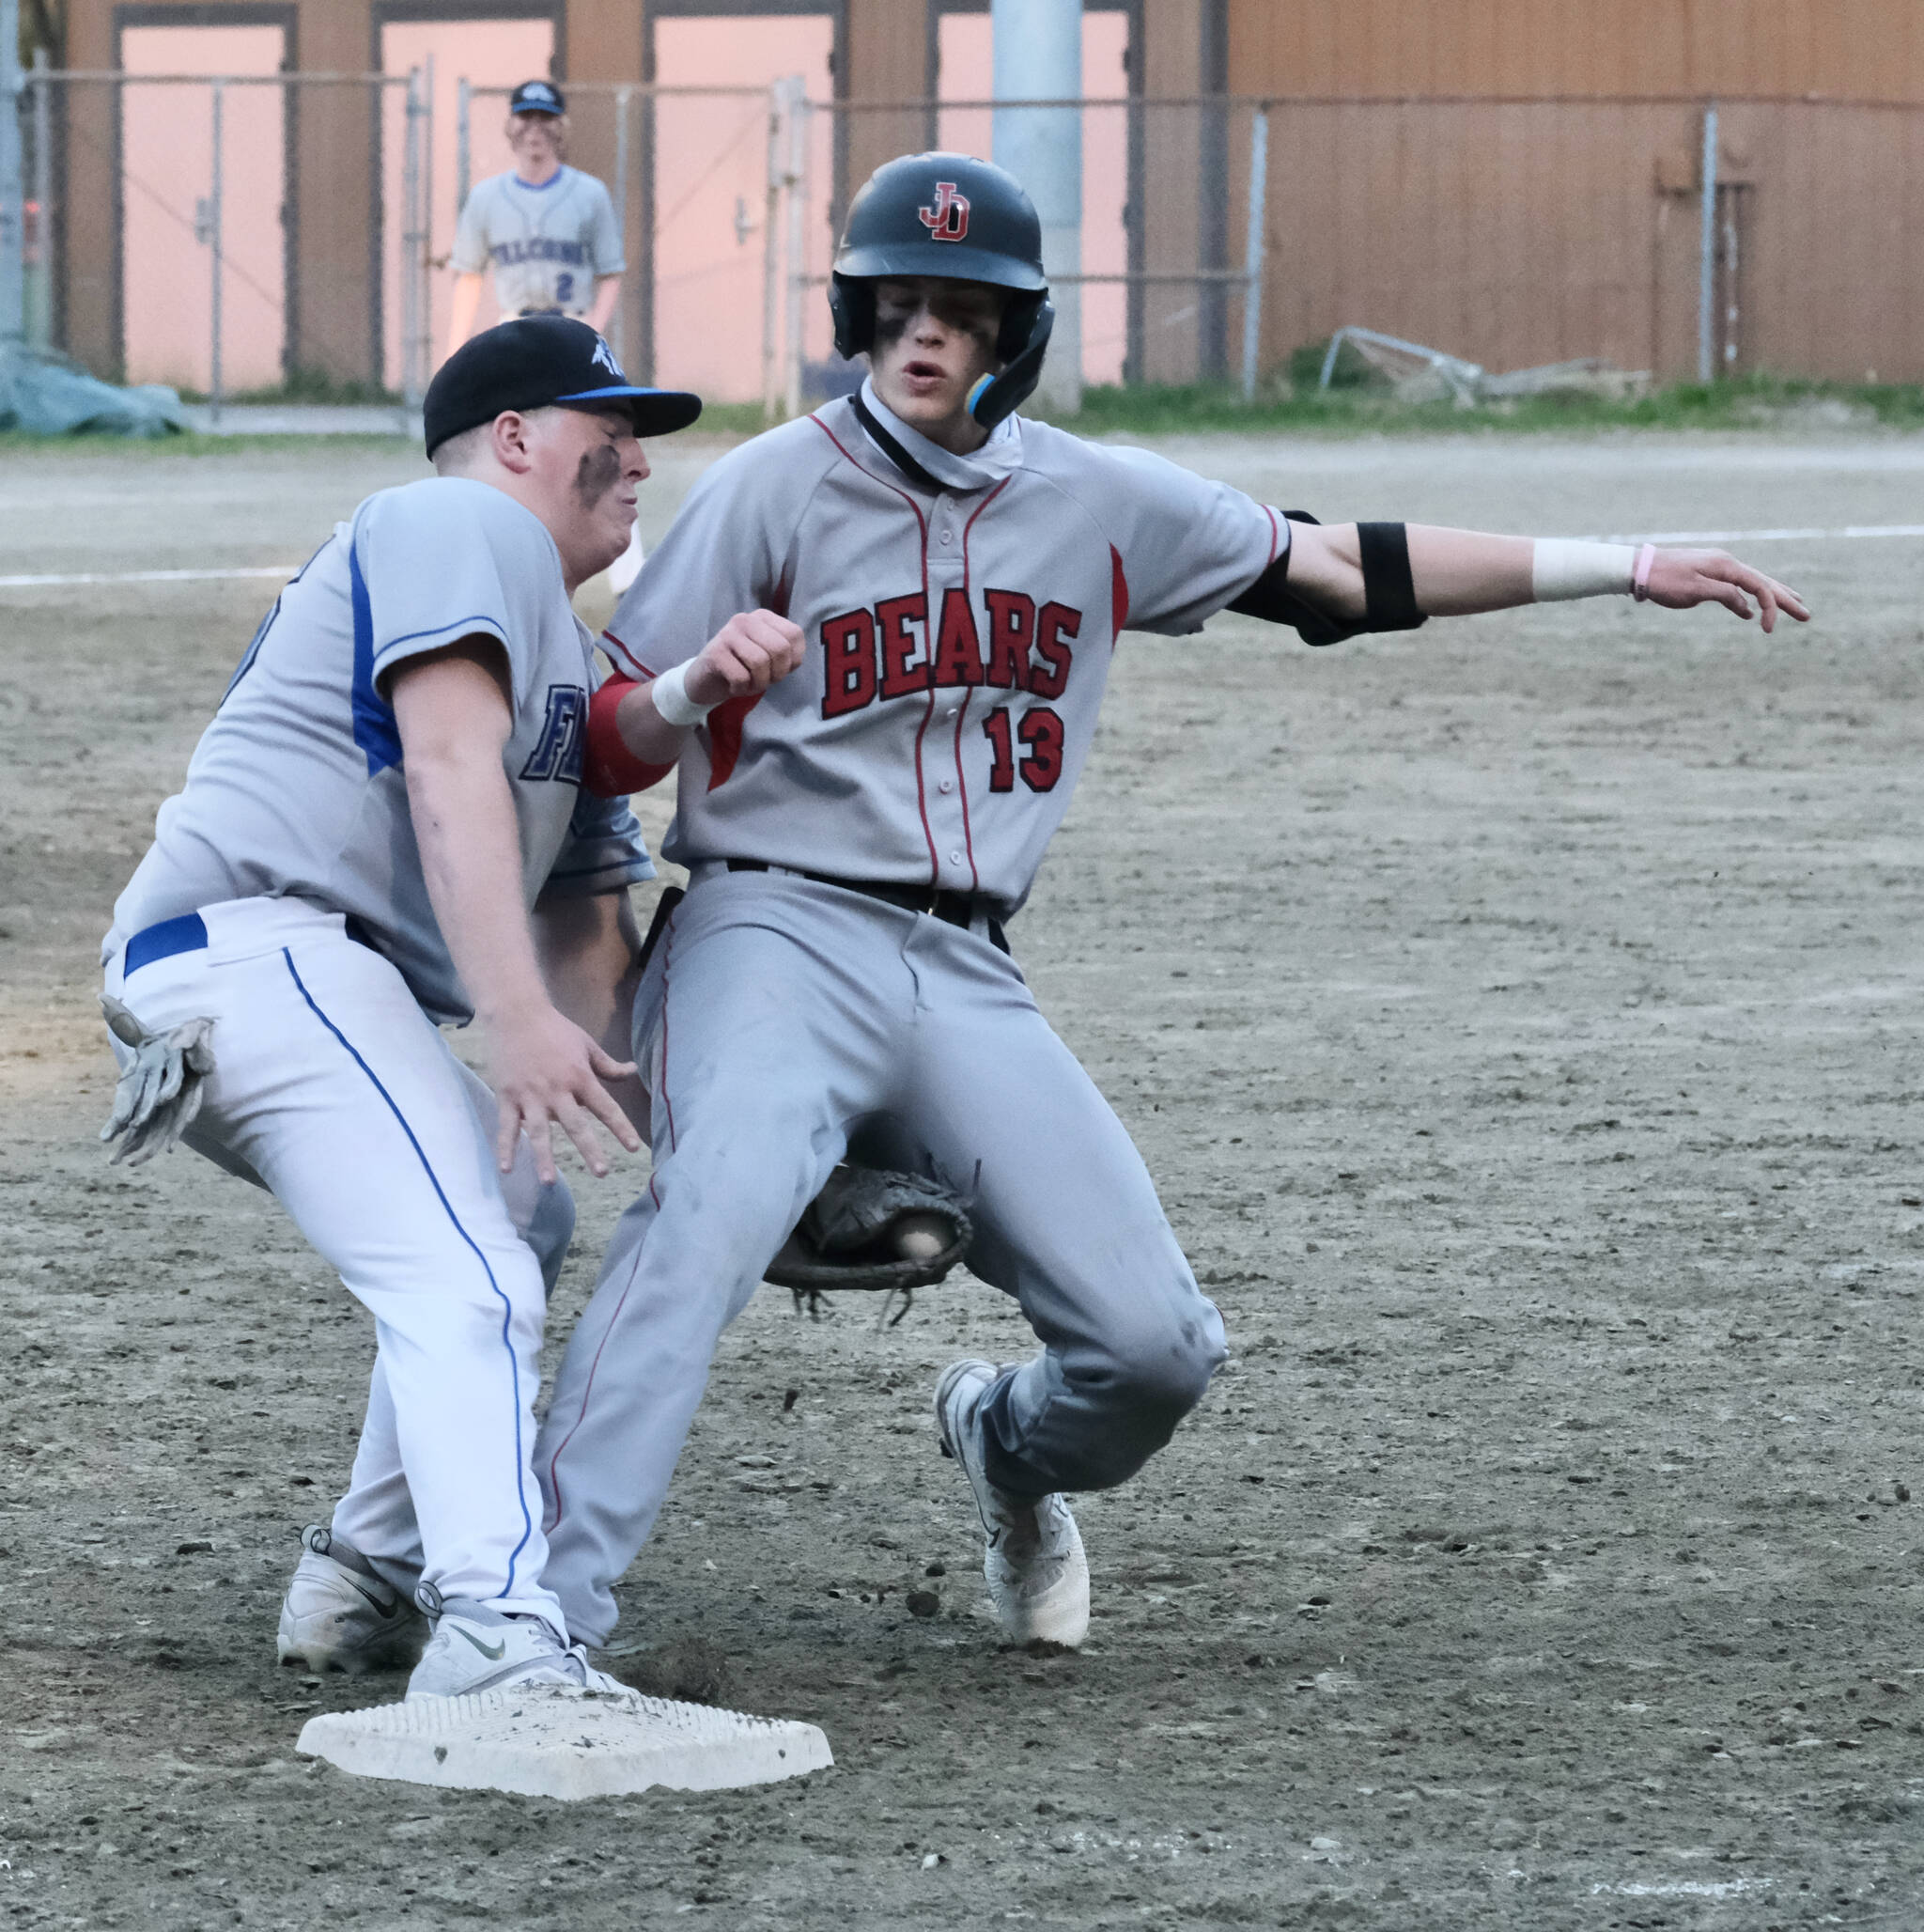 Thunder Mountain senior first baseman TJ Womack tags out Juneau-Douglas High School: Yadaa.at Kalé senior base runner Kaleb Campbell (13) on a pickoff move from Falcons’ pitcher Anthony Anderson in the top of the fourth inning Tuesday at Adair-Kennedy Field. (Klas Stolpe / Juneau Empire)